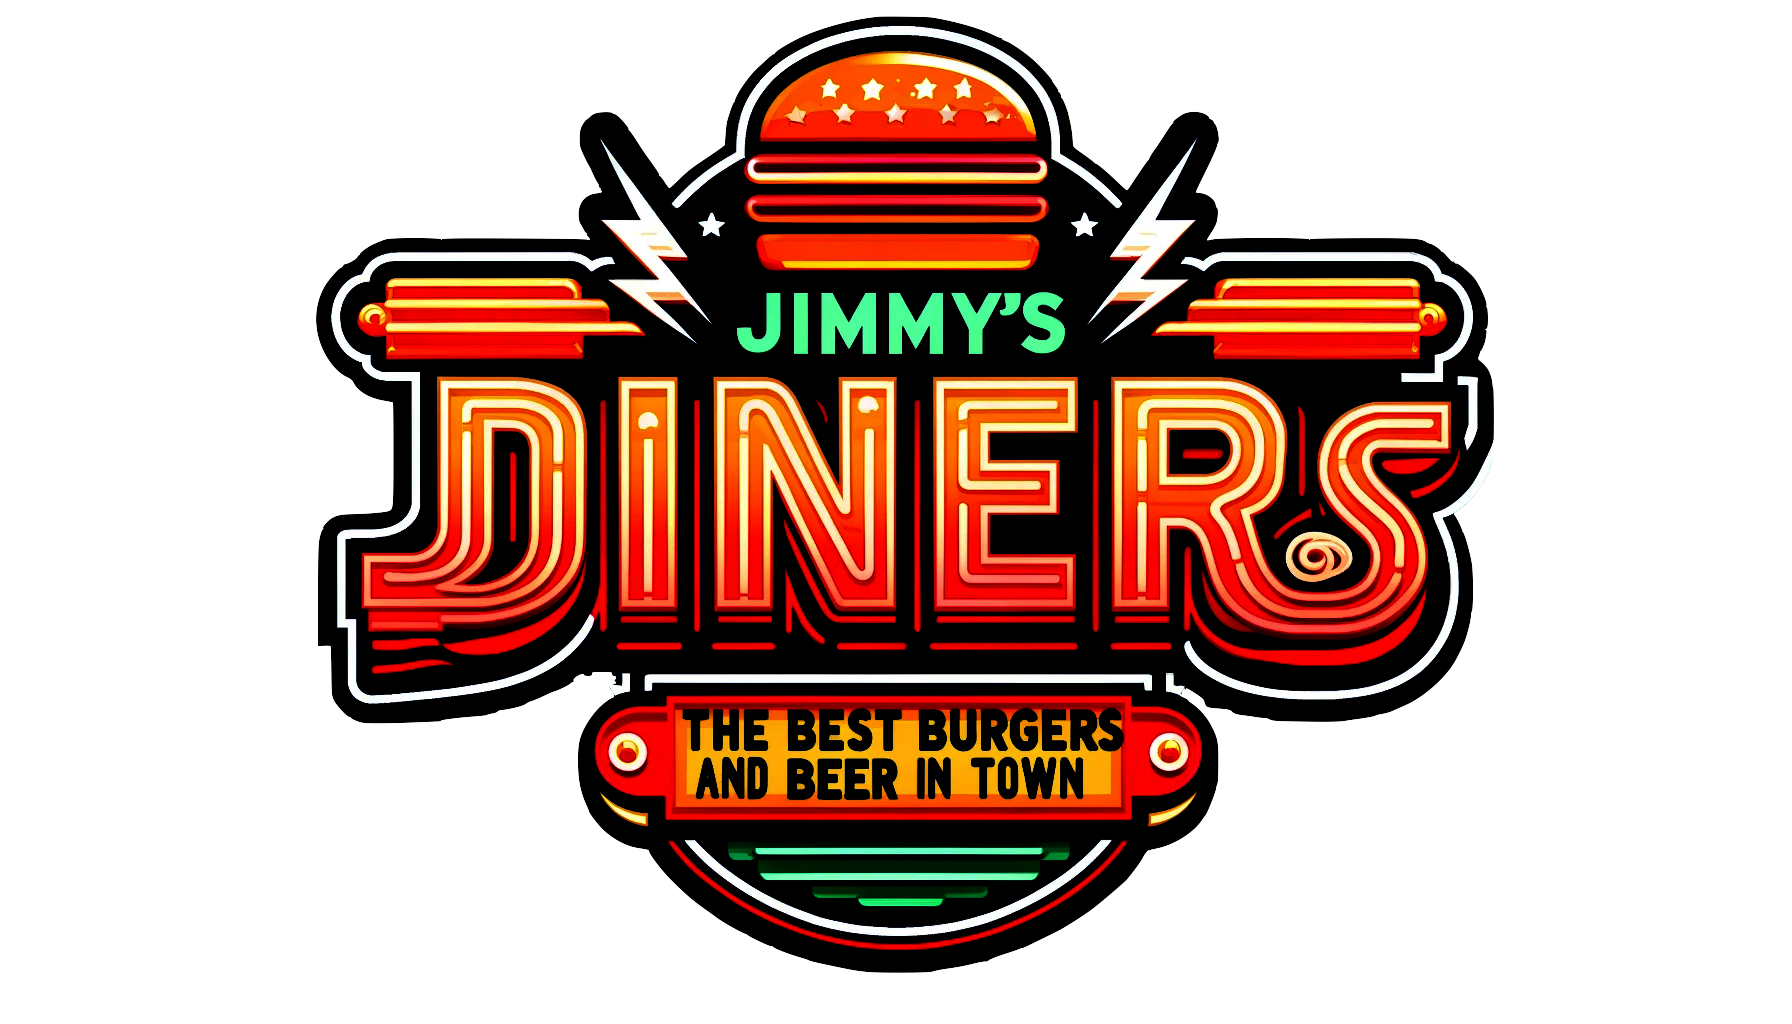 Jimmys Dinner Logo, the best burgers and beer in town